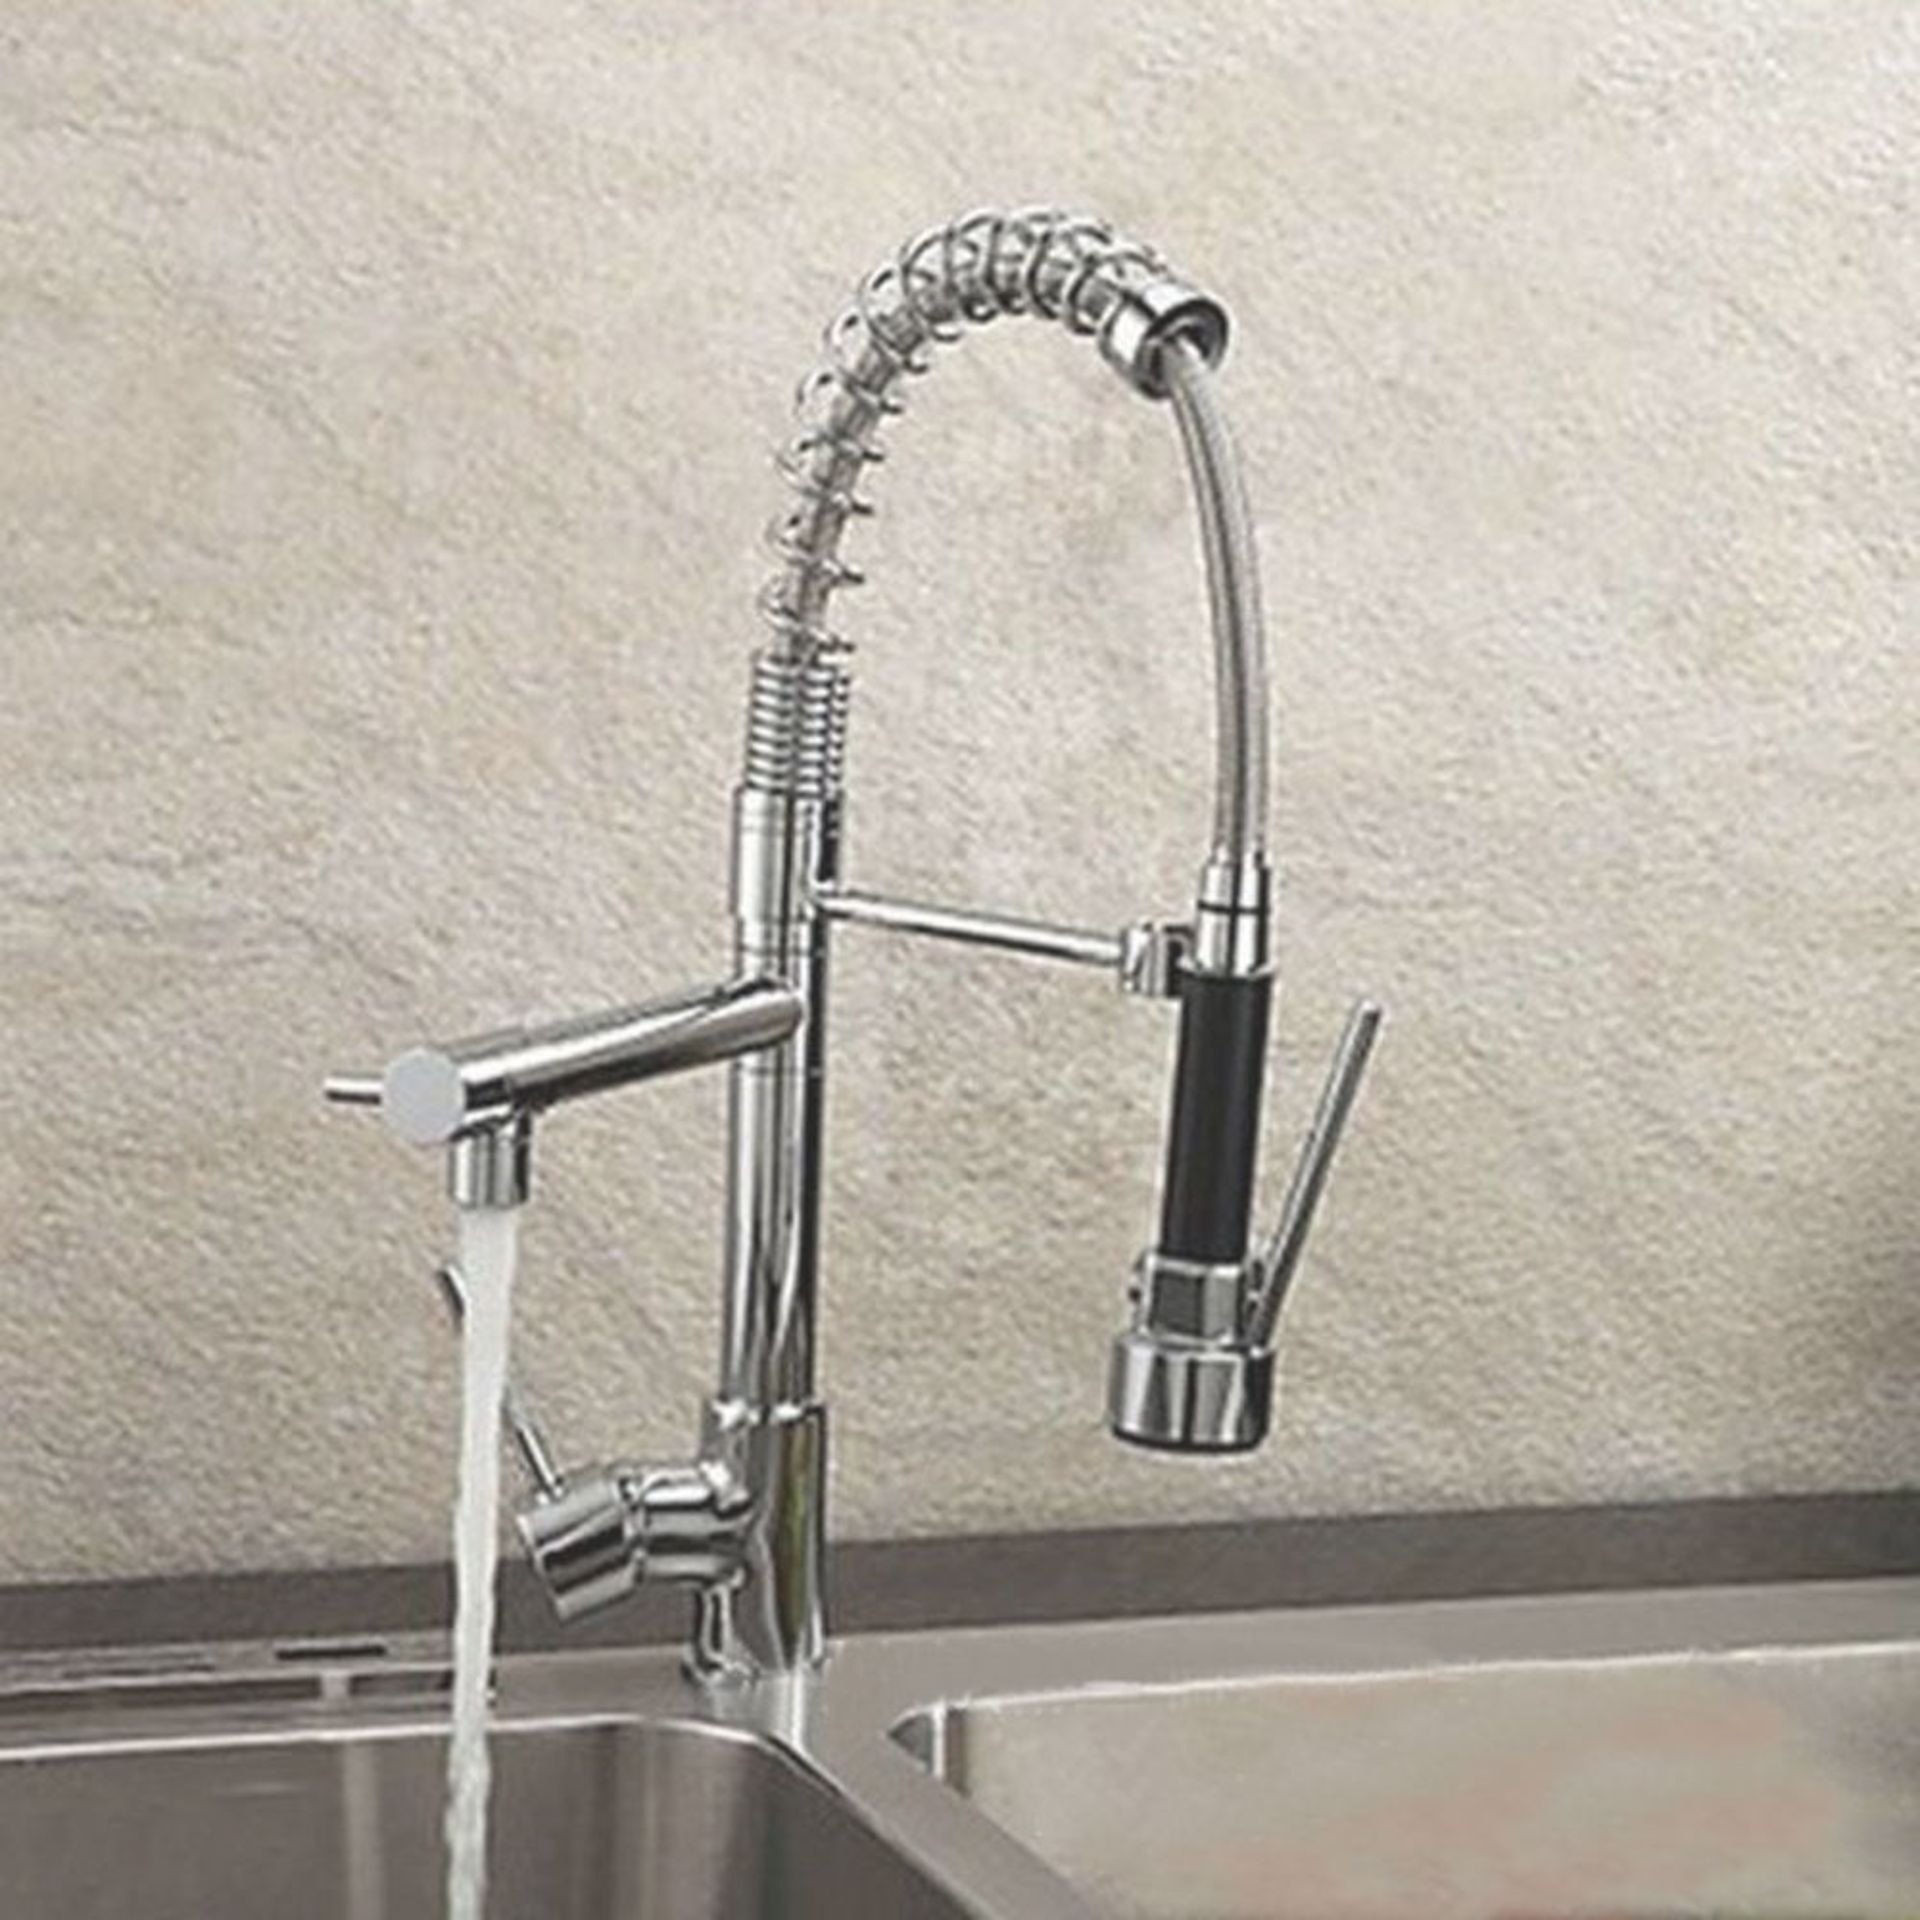 NEW & BOXED Bentley Modern Monobloc Chrome Brass Pull Out Spray Mixer Tap.RRP £349.99.This ta...